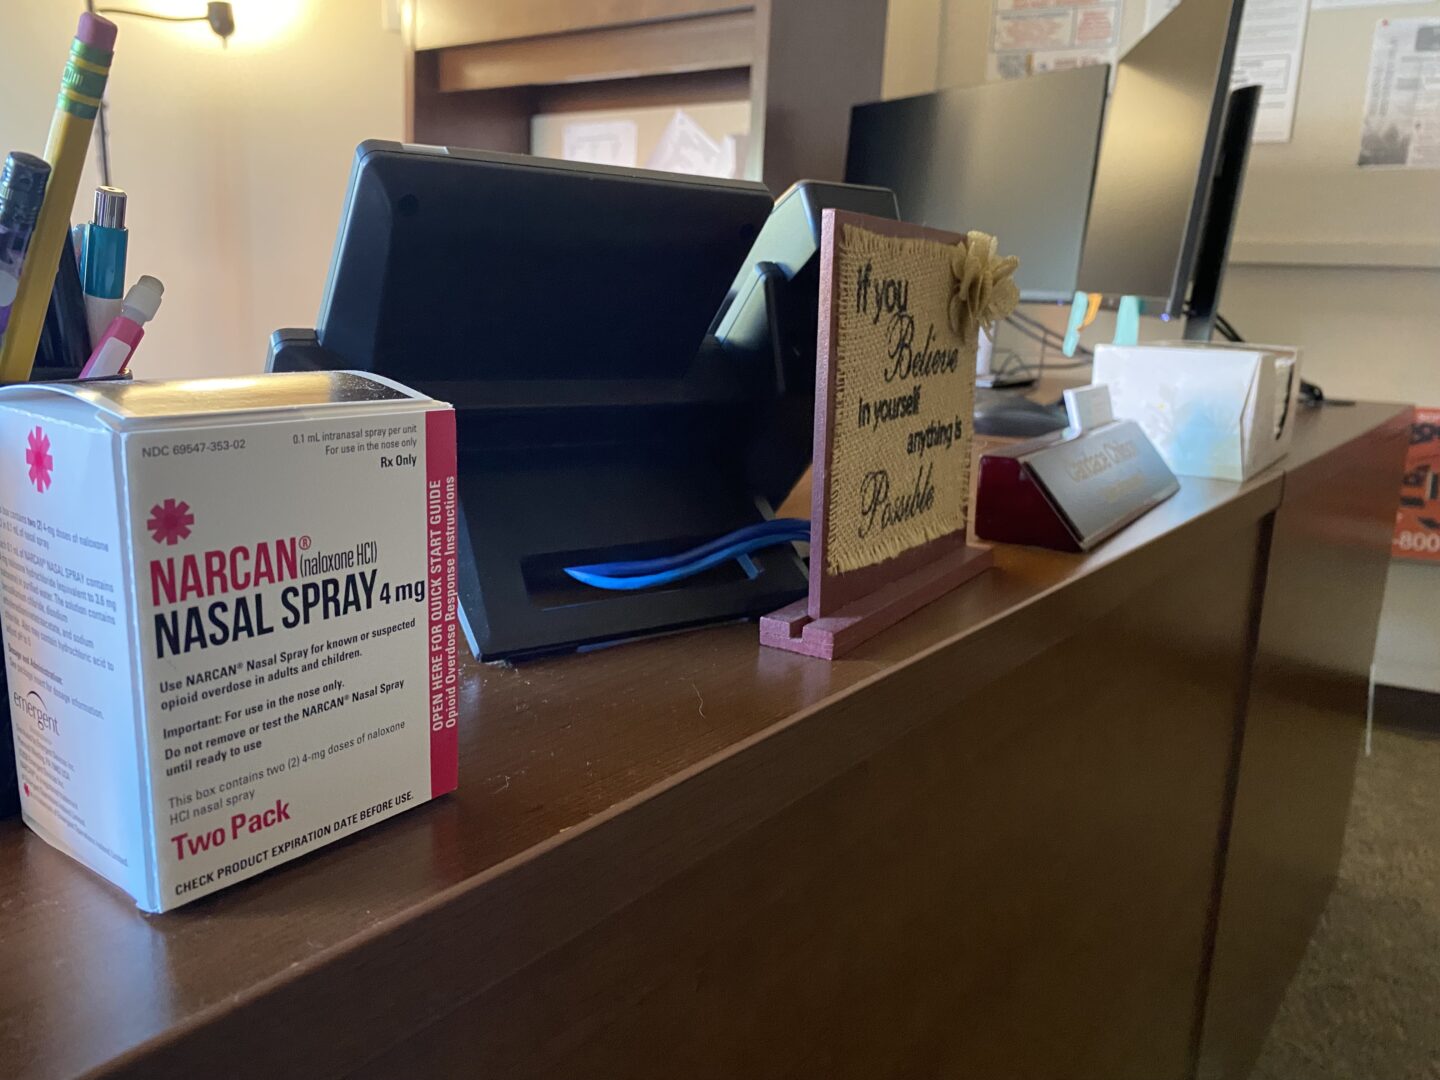 Sullivan County commissioners used a portion of opioid settlement money to hire a county case manager. Her desk includes a box of the opioid overdose-reversal drug Narcan.